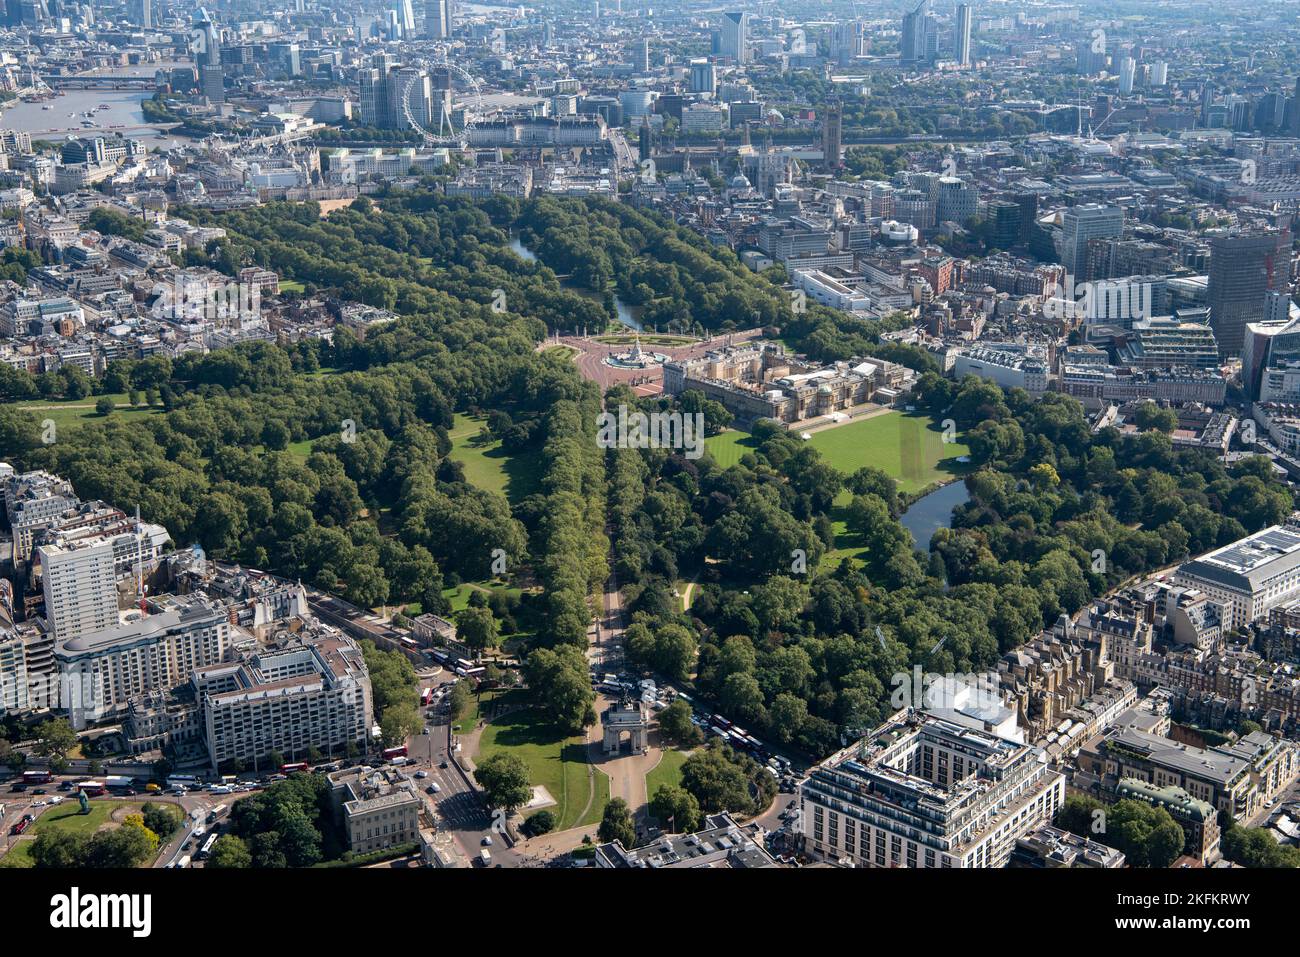 Looking east from Wellington Arch along Constitution Hill to the London Eye and River Thames, Westminster, Greater London Authority, 2021. Stock Photo